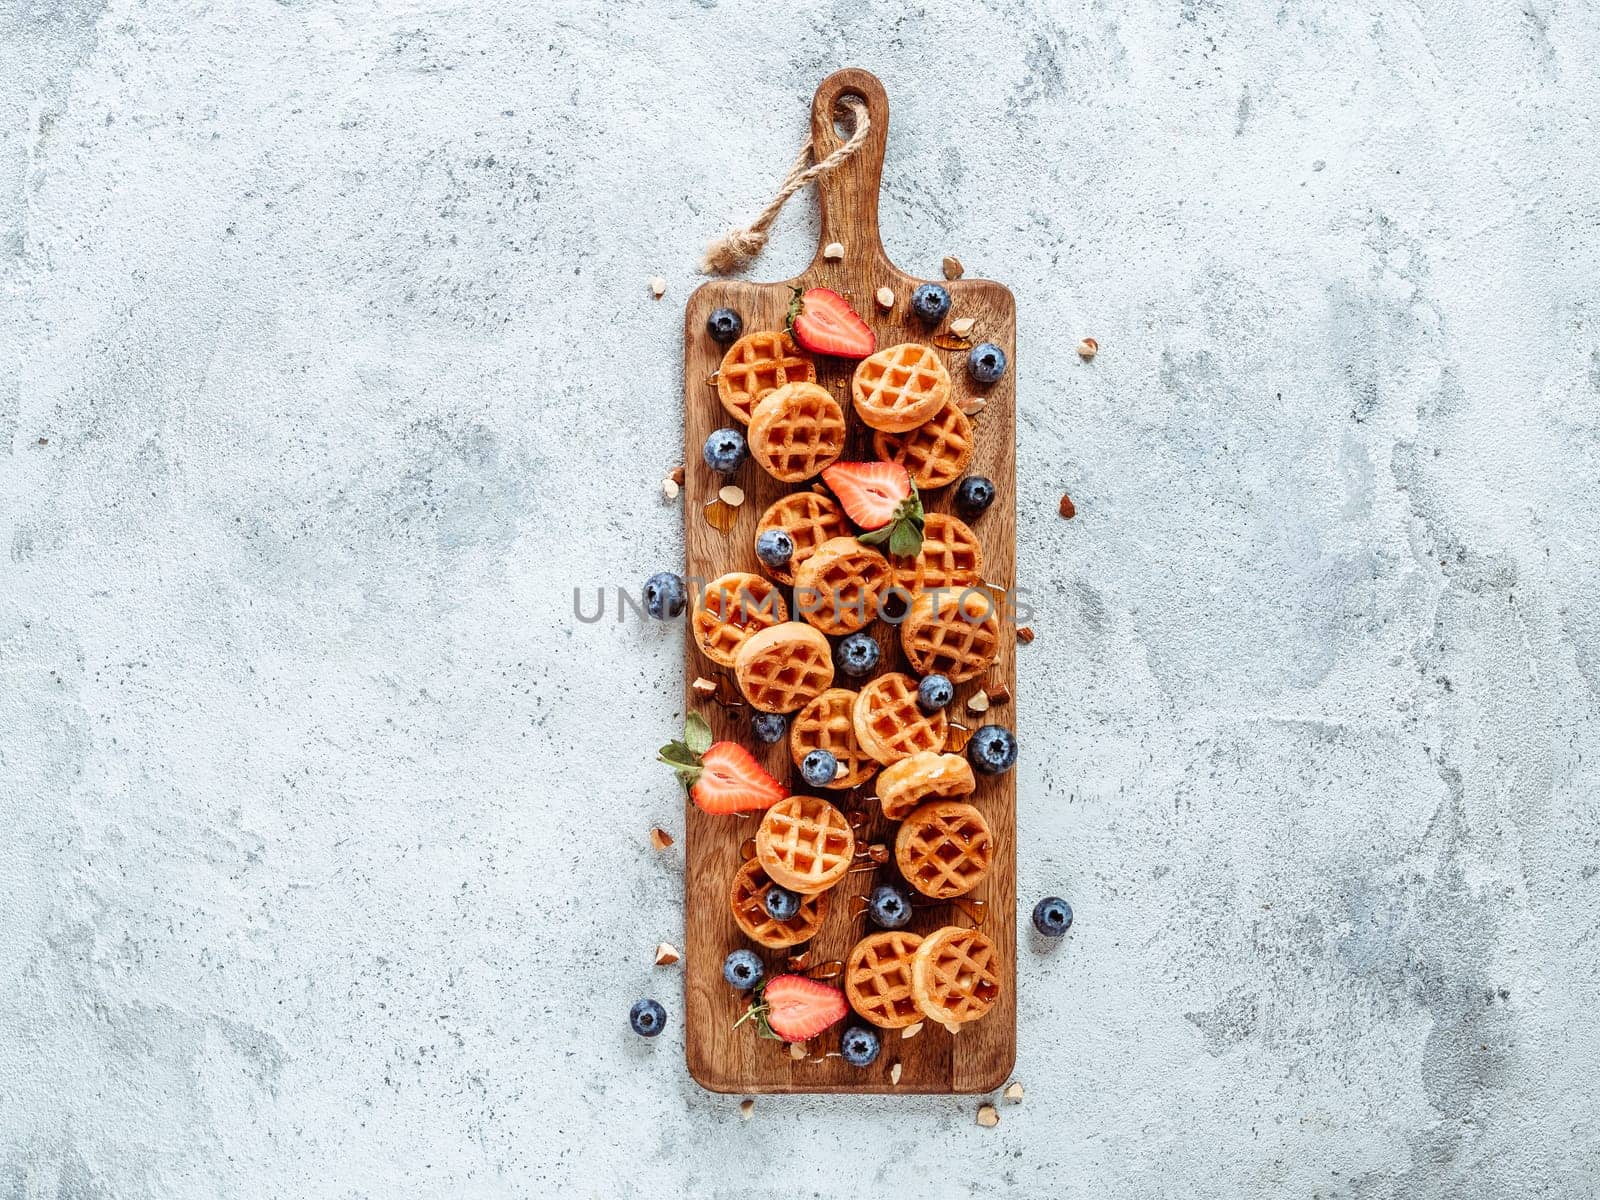 Small round delicious soft belgian waffles on cutting board. Fresh belgian waffles with berries and caramel sauce top view. Copy space for text or mock up